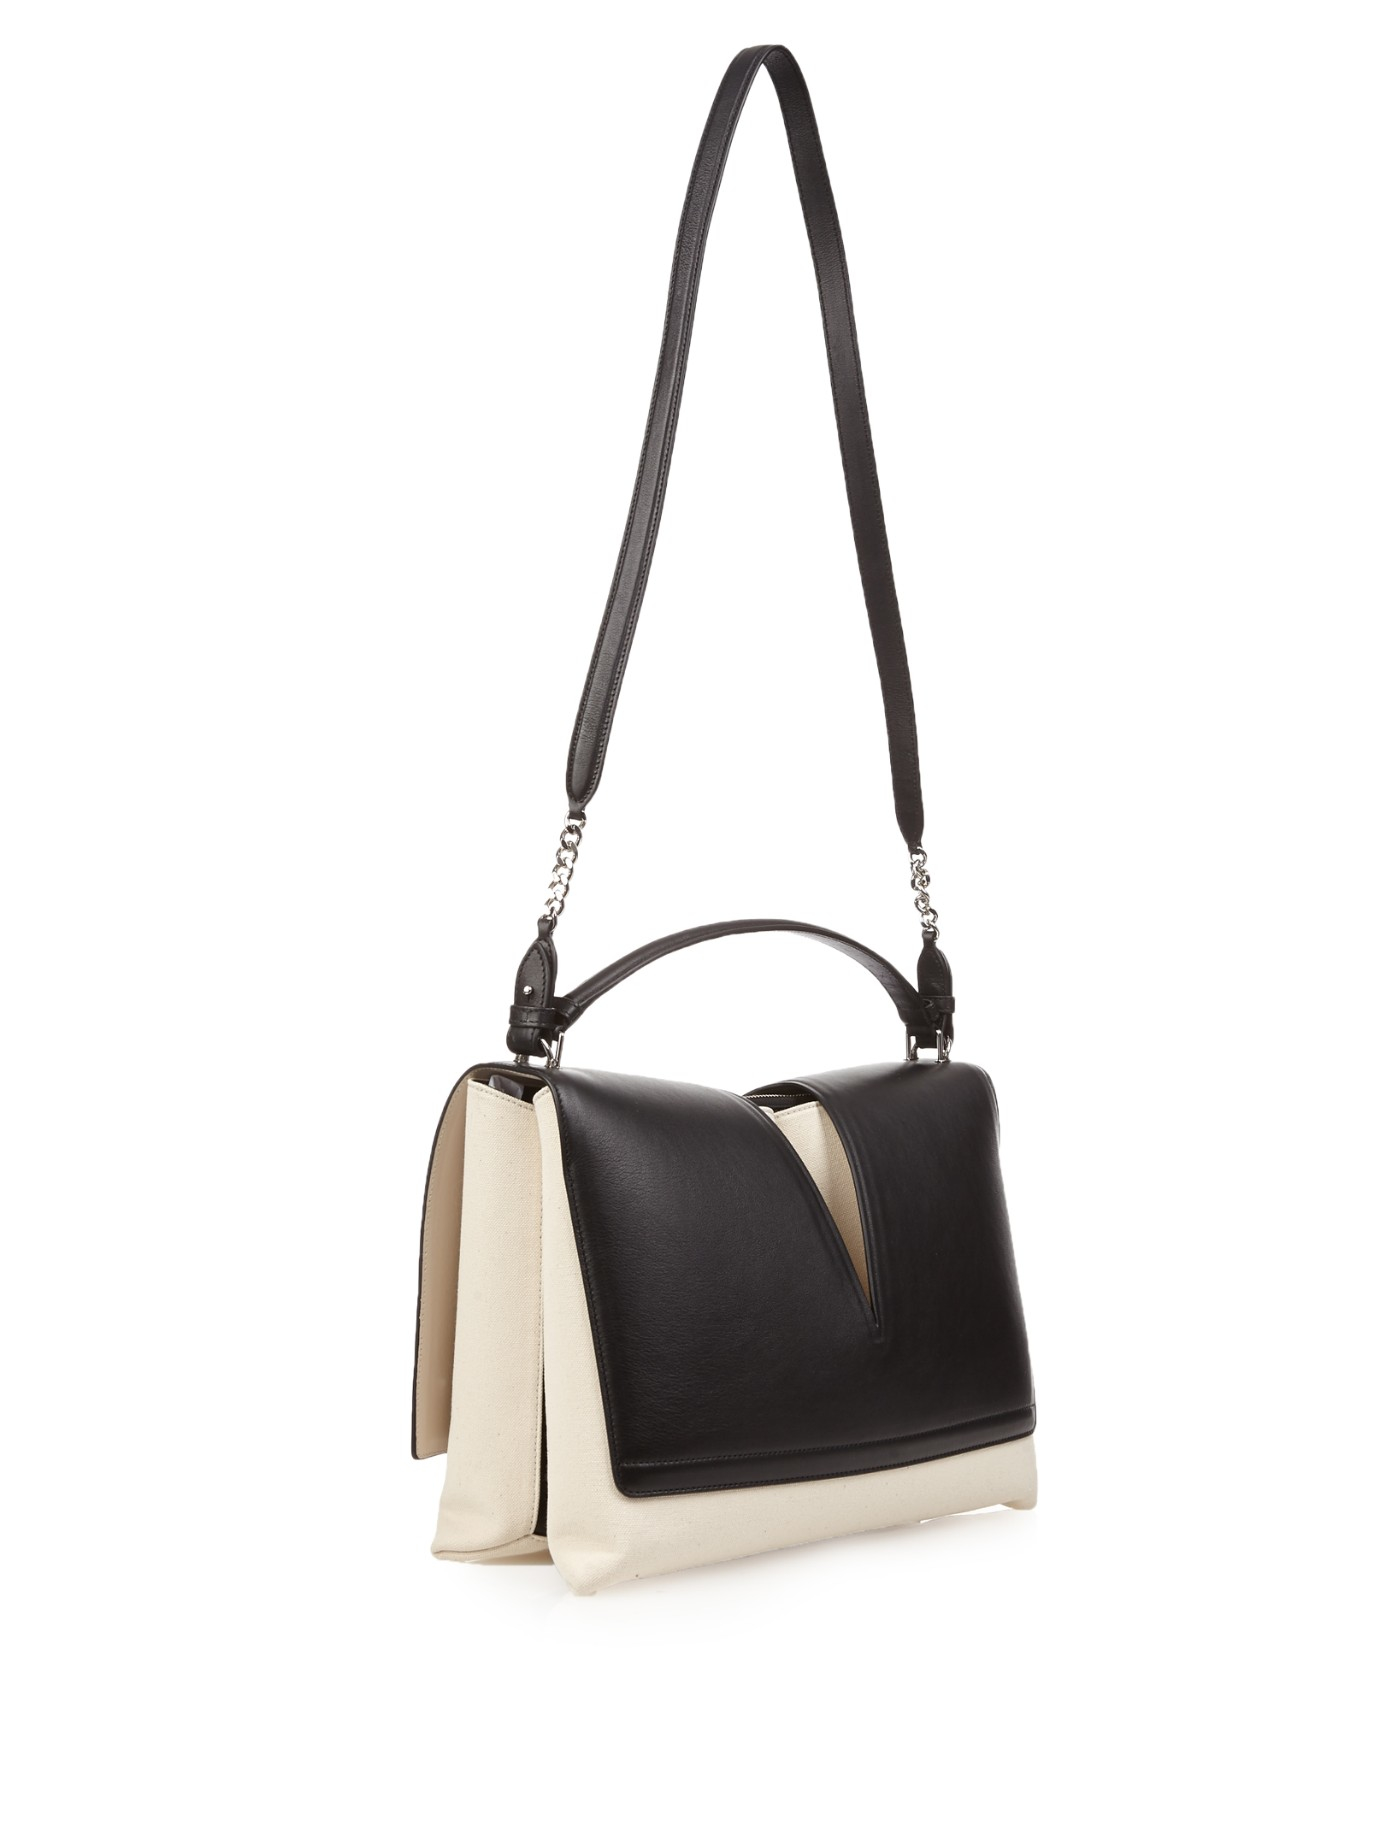 Lyst - Jil Sander View Canvas and Leather Shoulder Bag in White